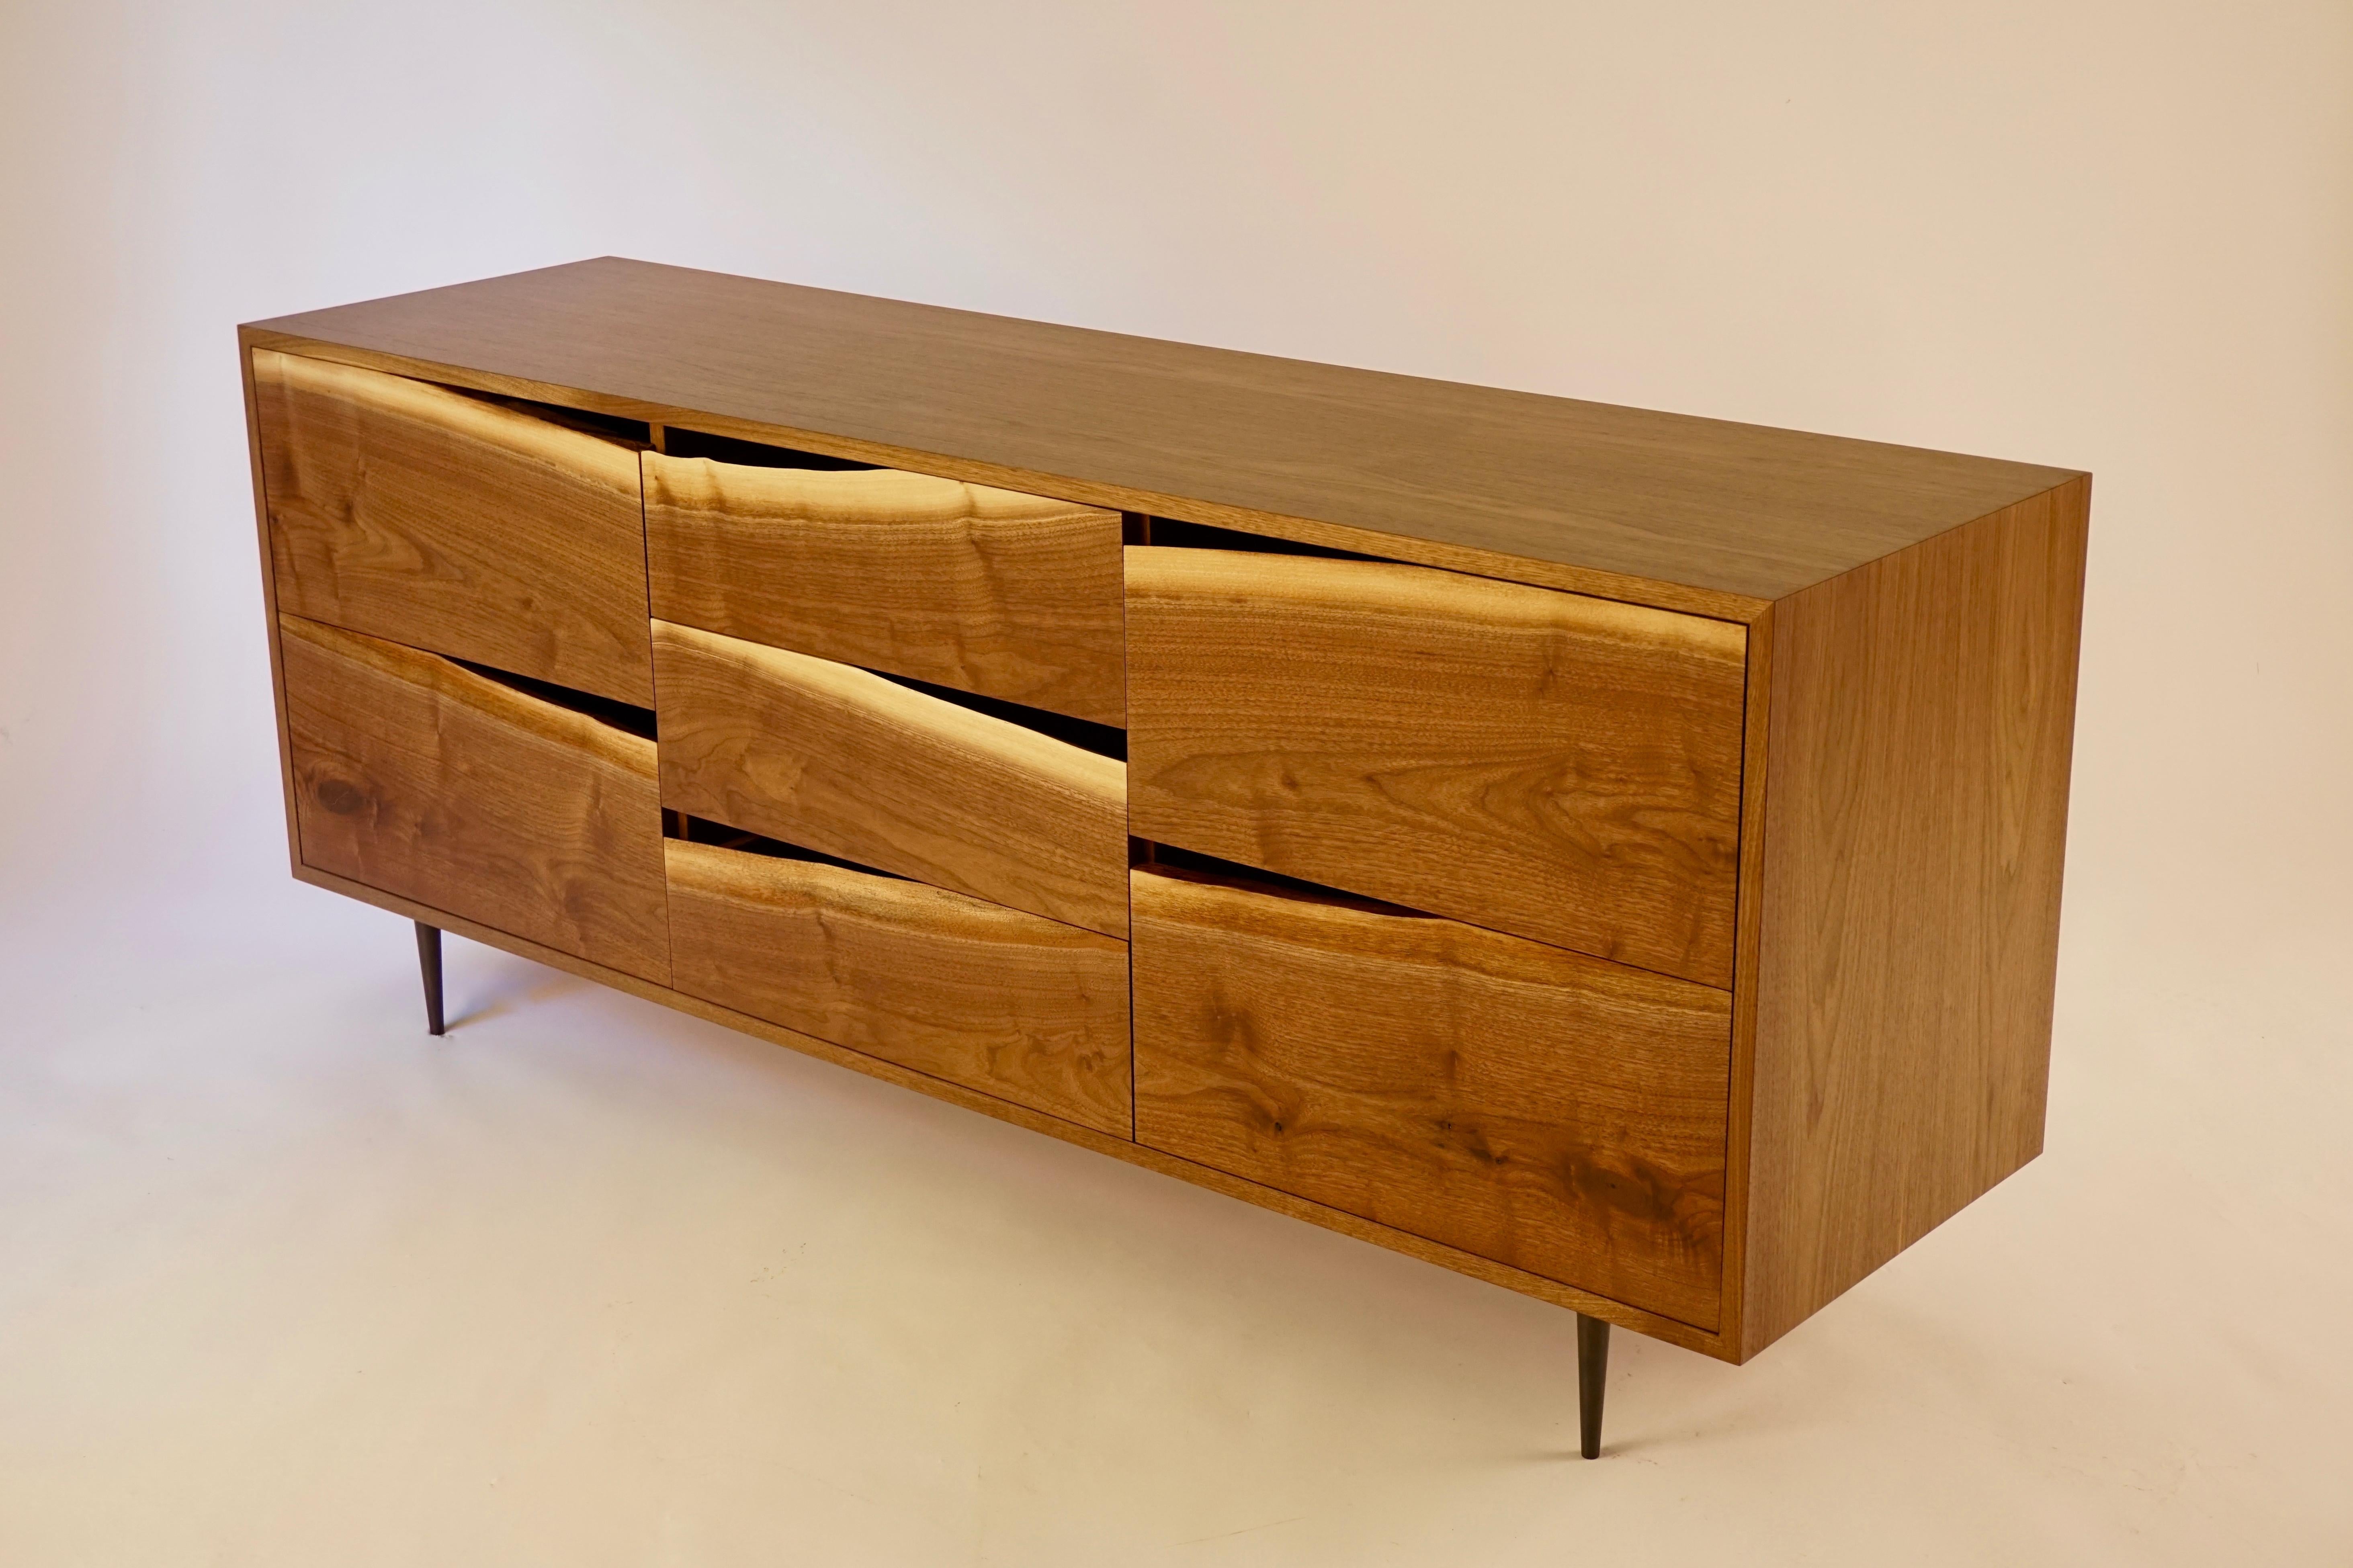 American Walnut Credenza with Natural Edged Drawer-Fronts and Turned Bronze Legs For Sale